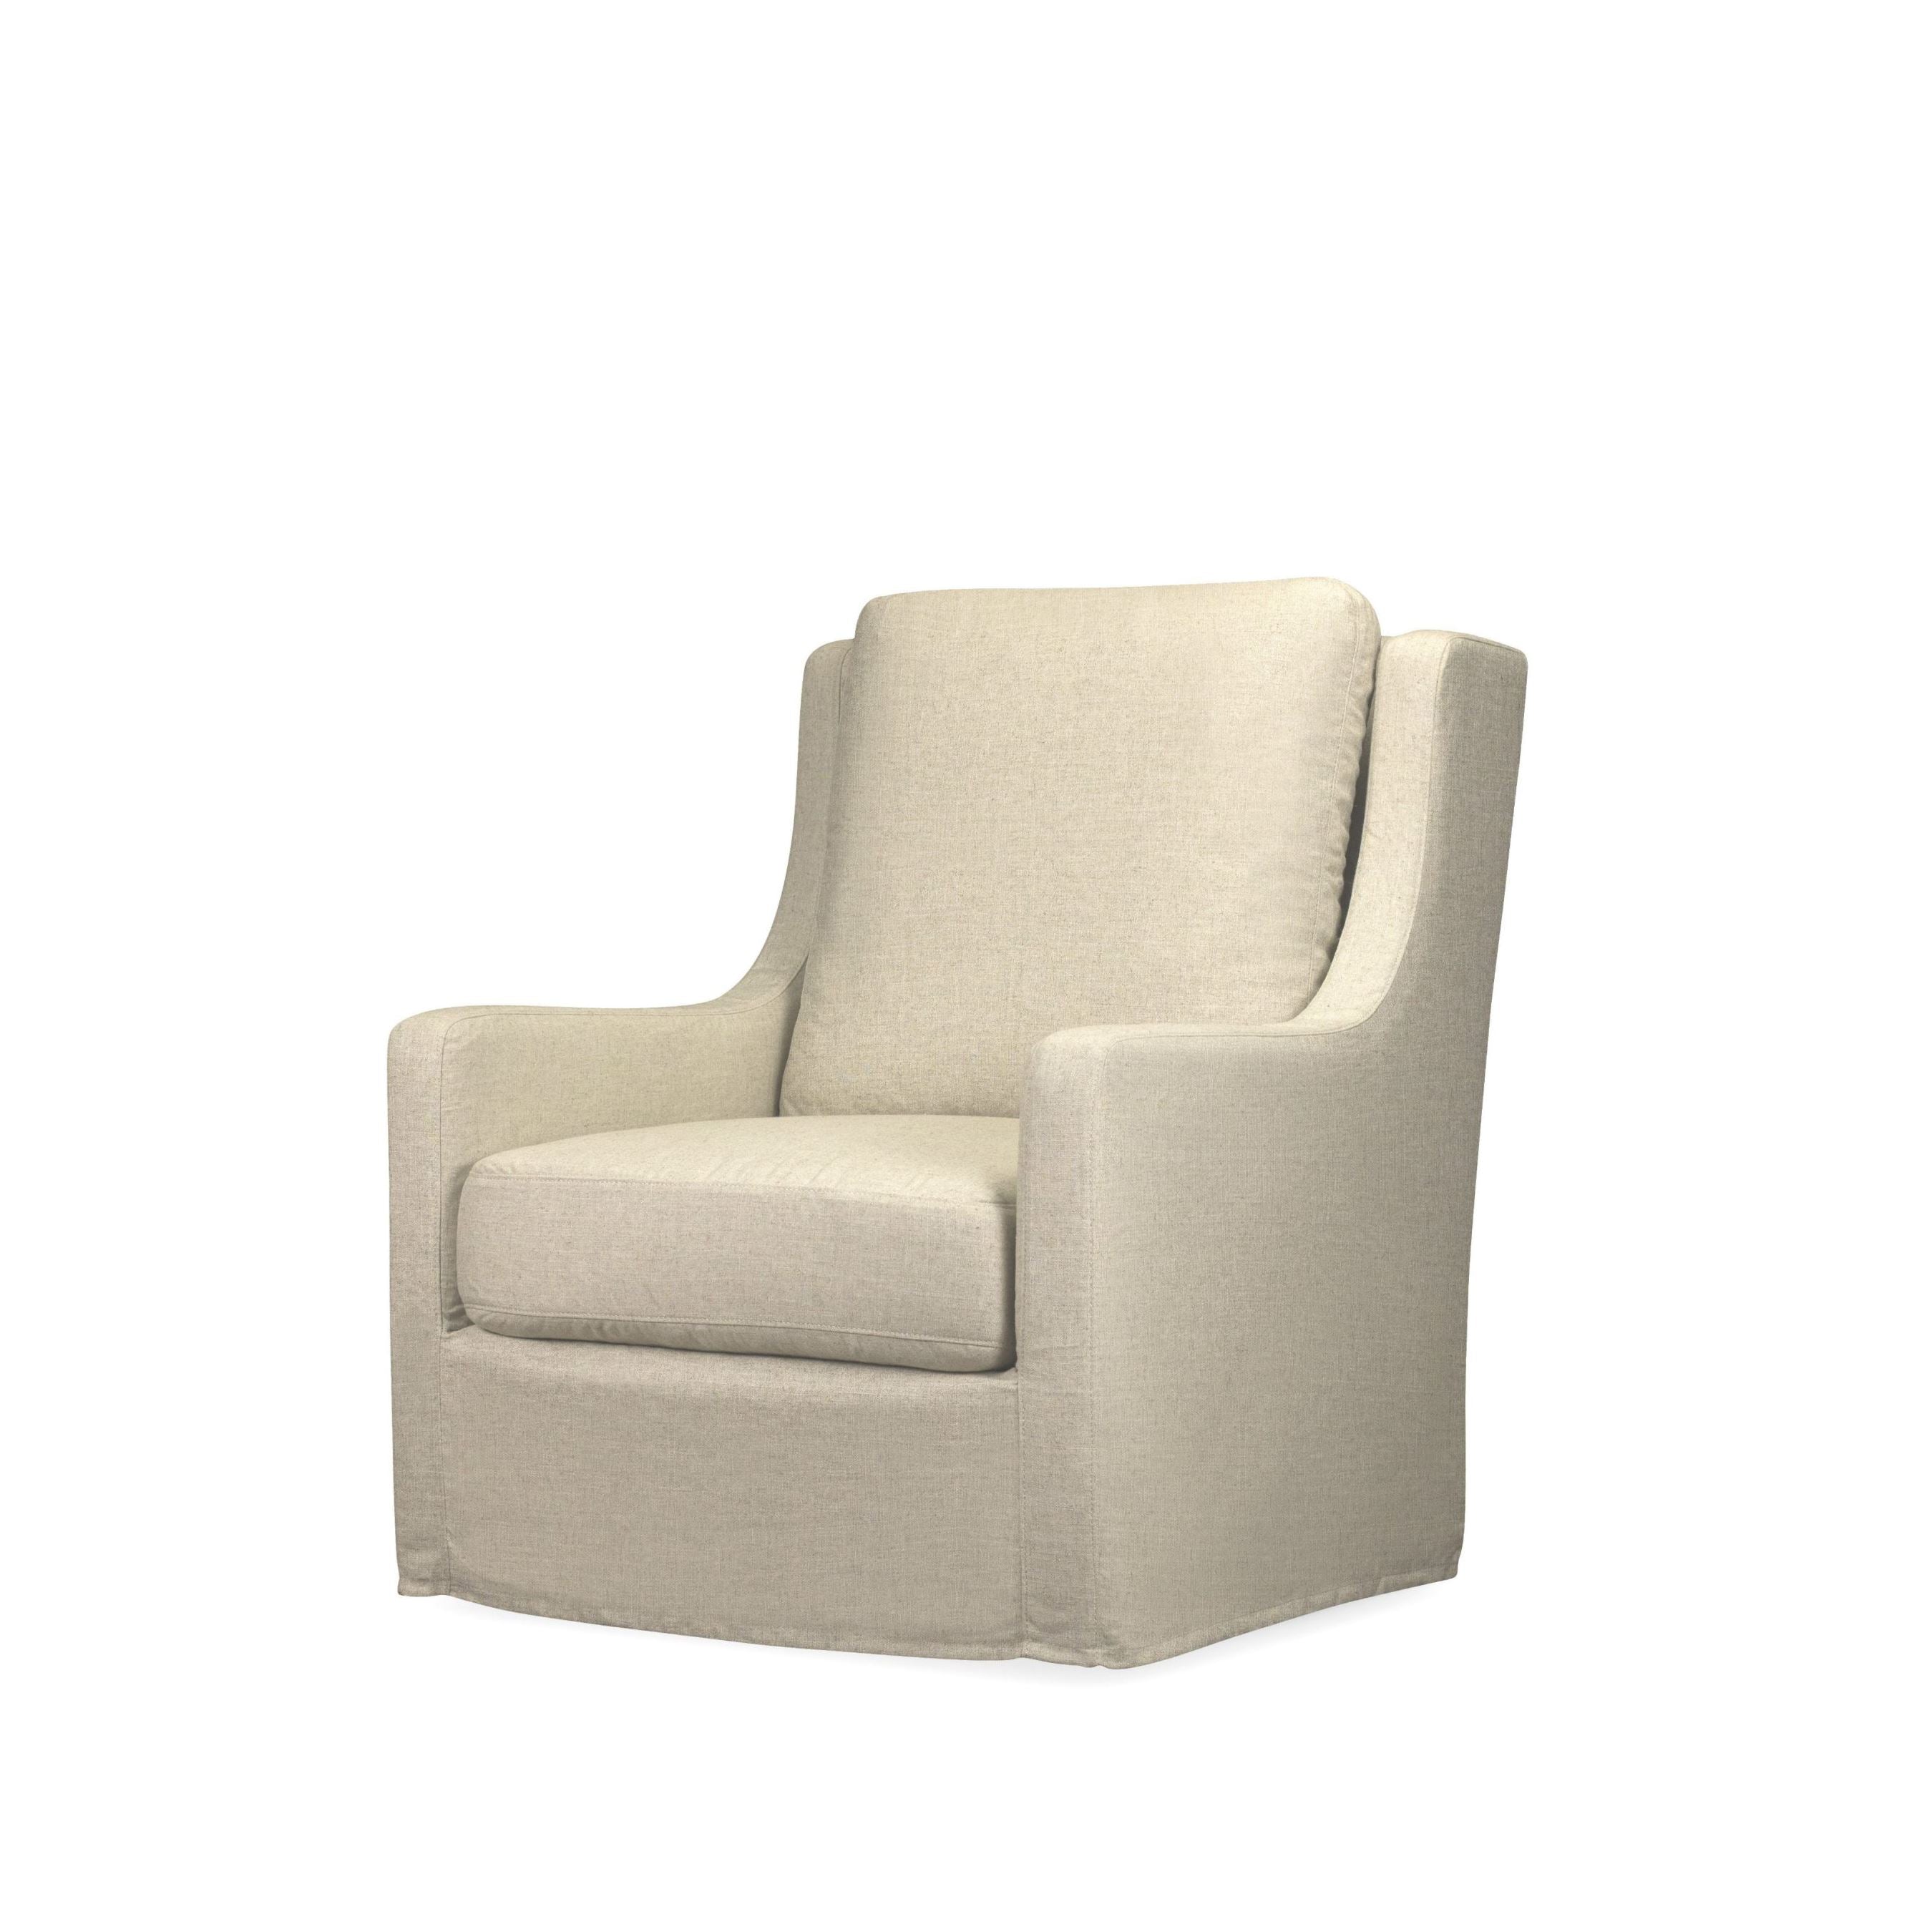 Maria Swivel Slipcovered Chair in Windfield Natural by Huck & Peck SWIVEL GLIDER Huck and Peck